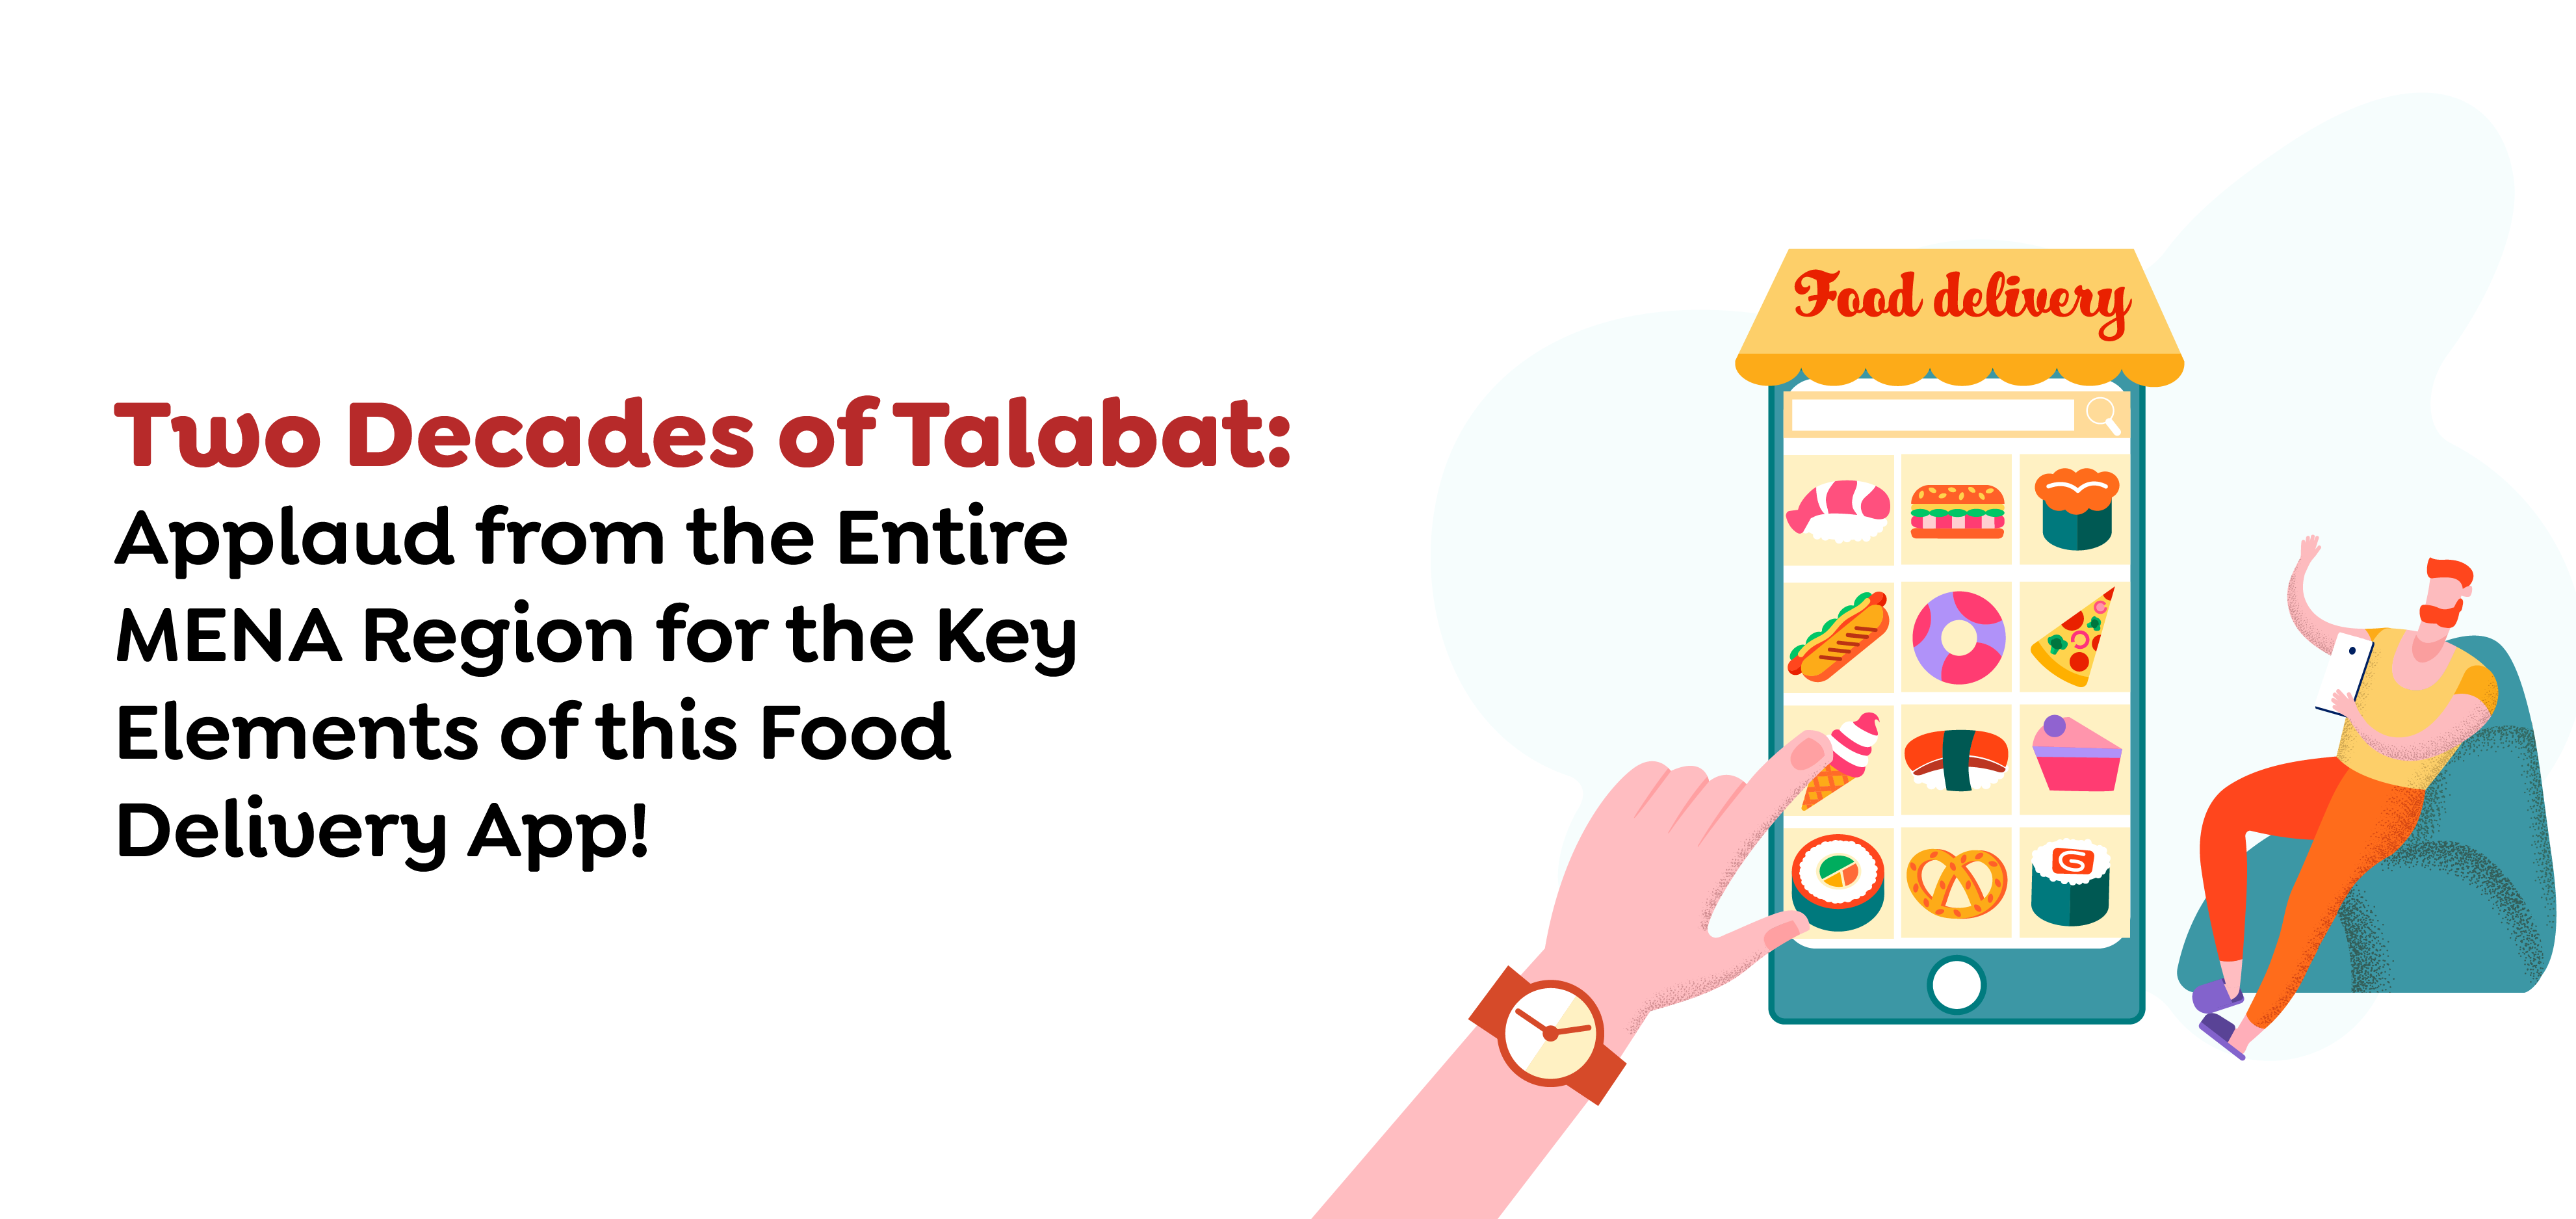 Two Decades of Talabat- Applaud from the Entire MENA Region for the Key Elements of this Food Delive